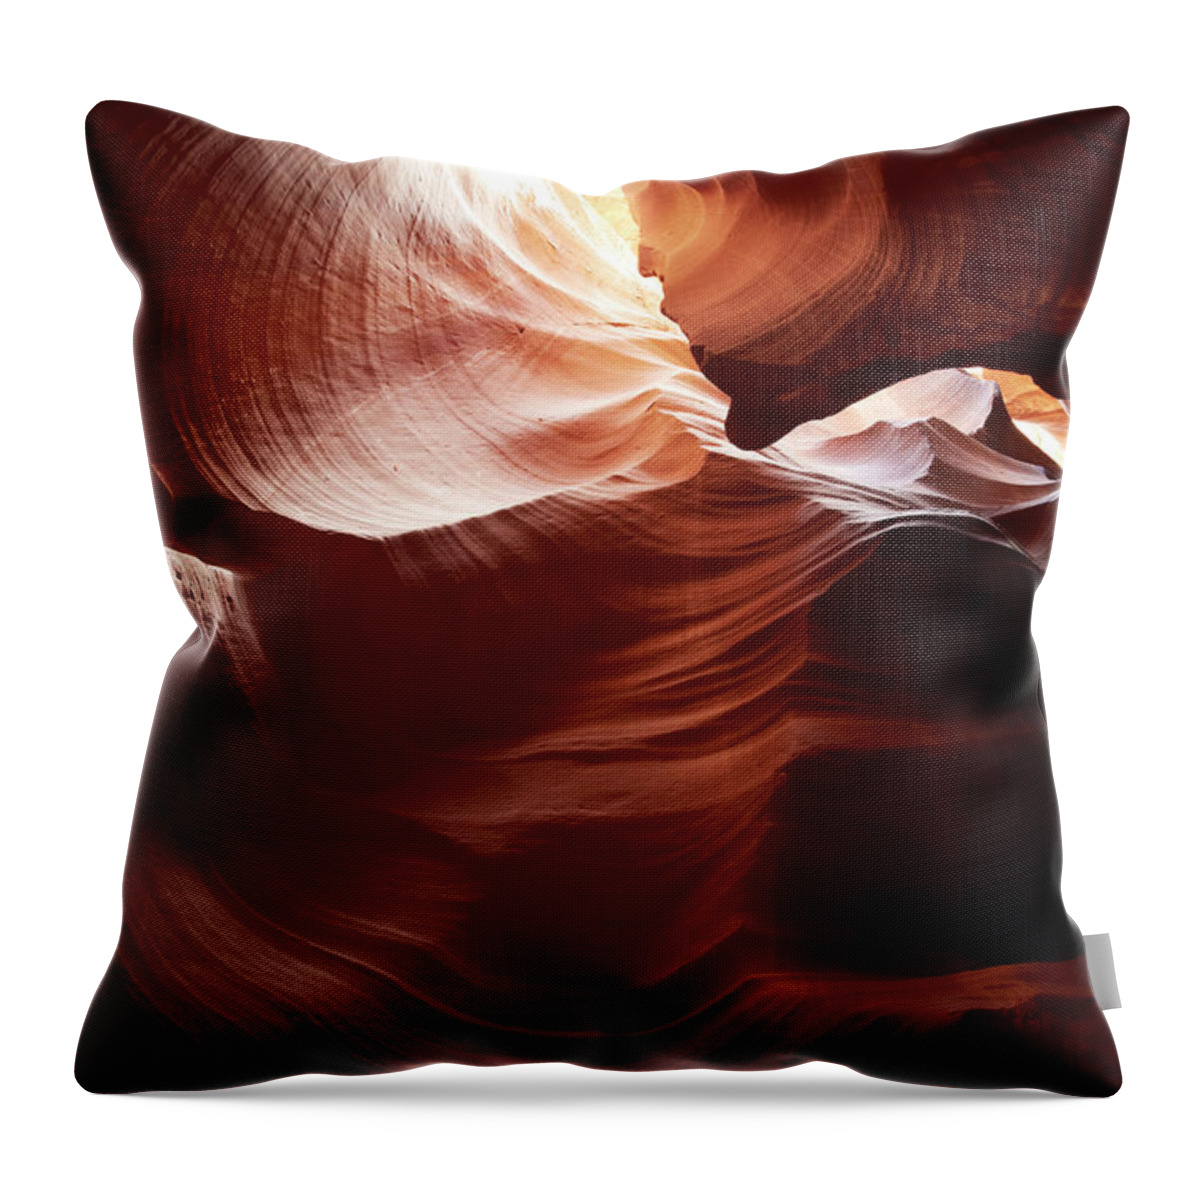 Arizona Throw Pillow featuring the photograph Upper Antelope Canyon Slot Canyon by Cultura Exclusive/ryan Benyi Photography